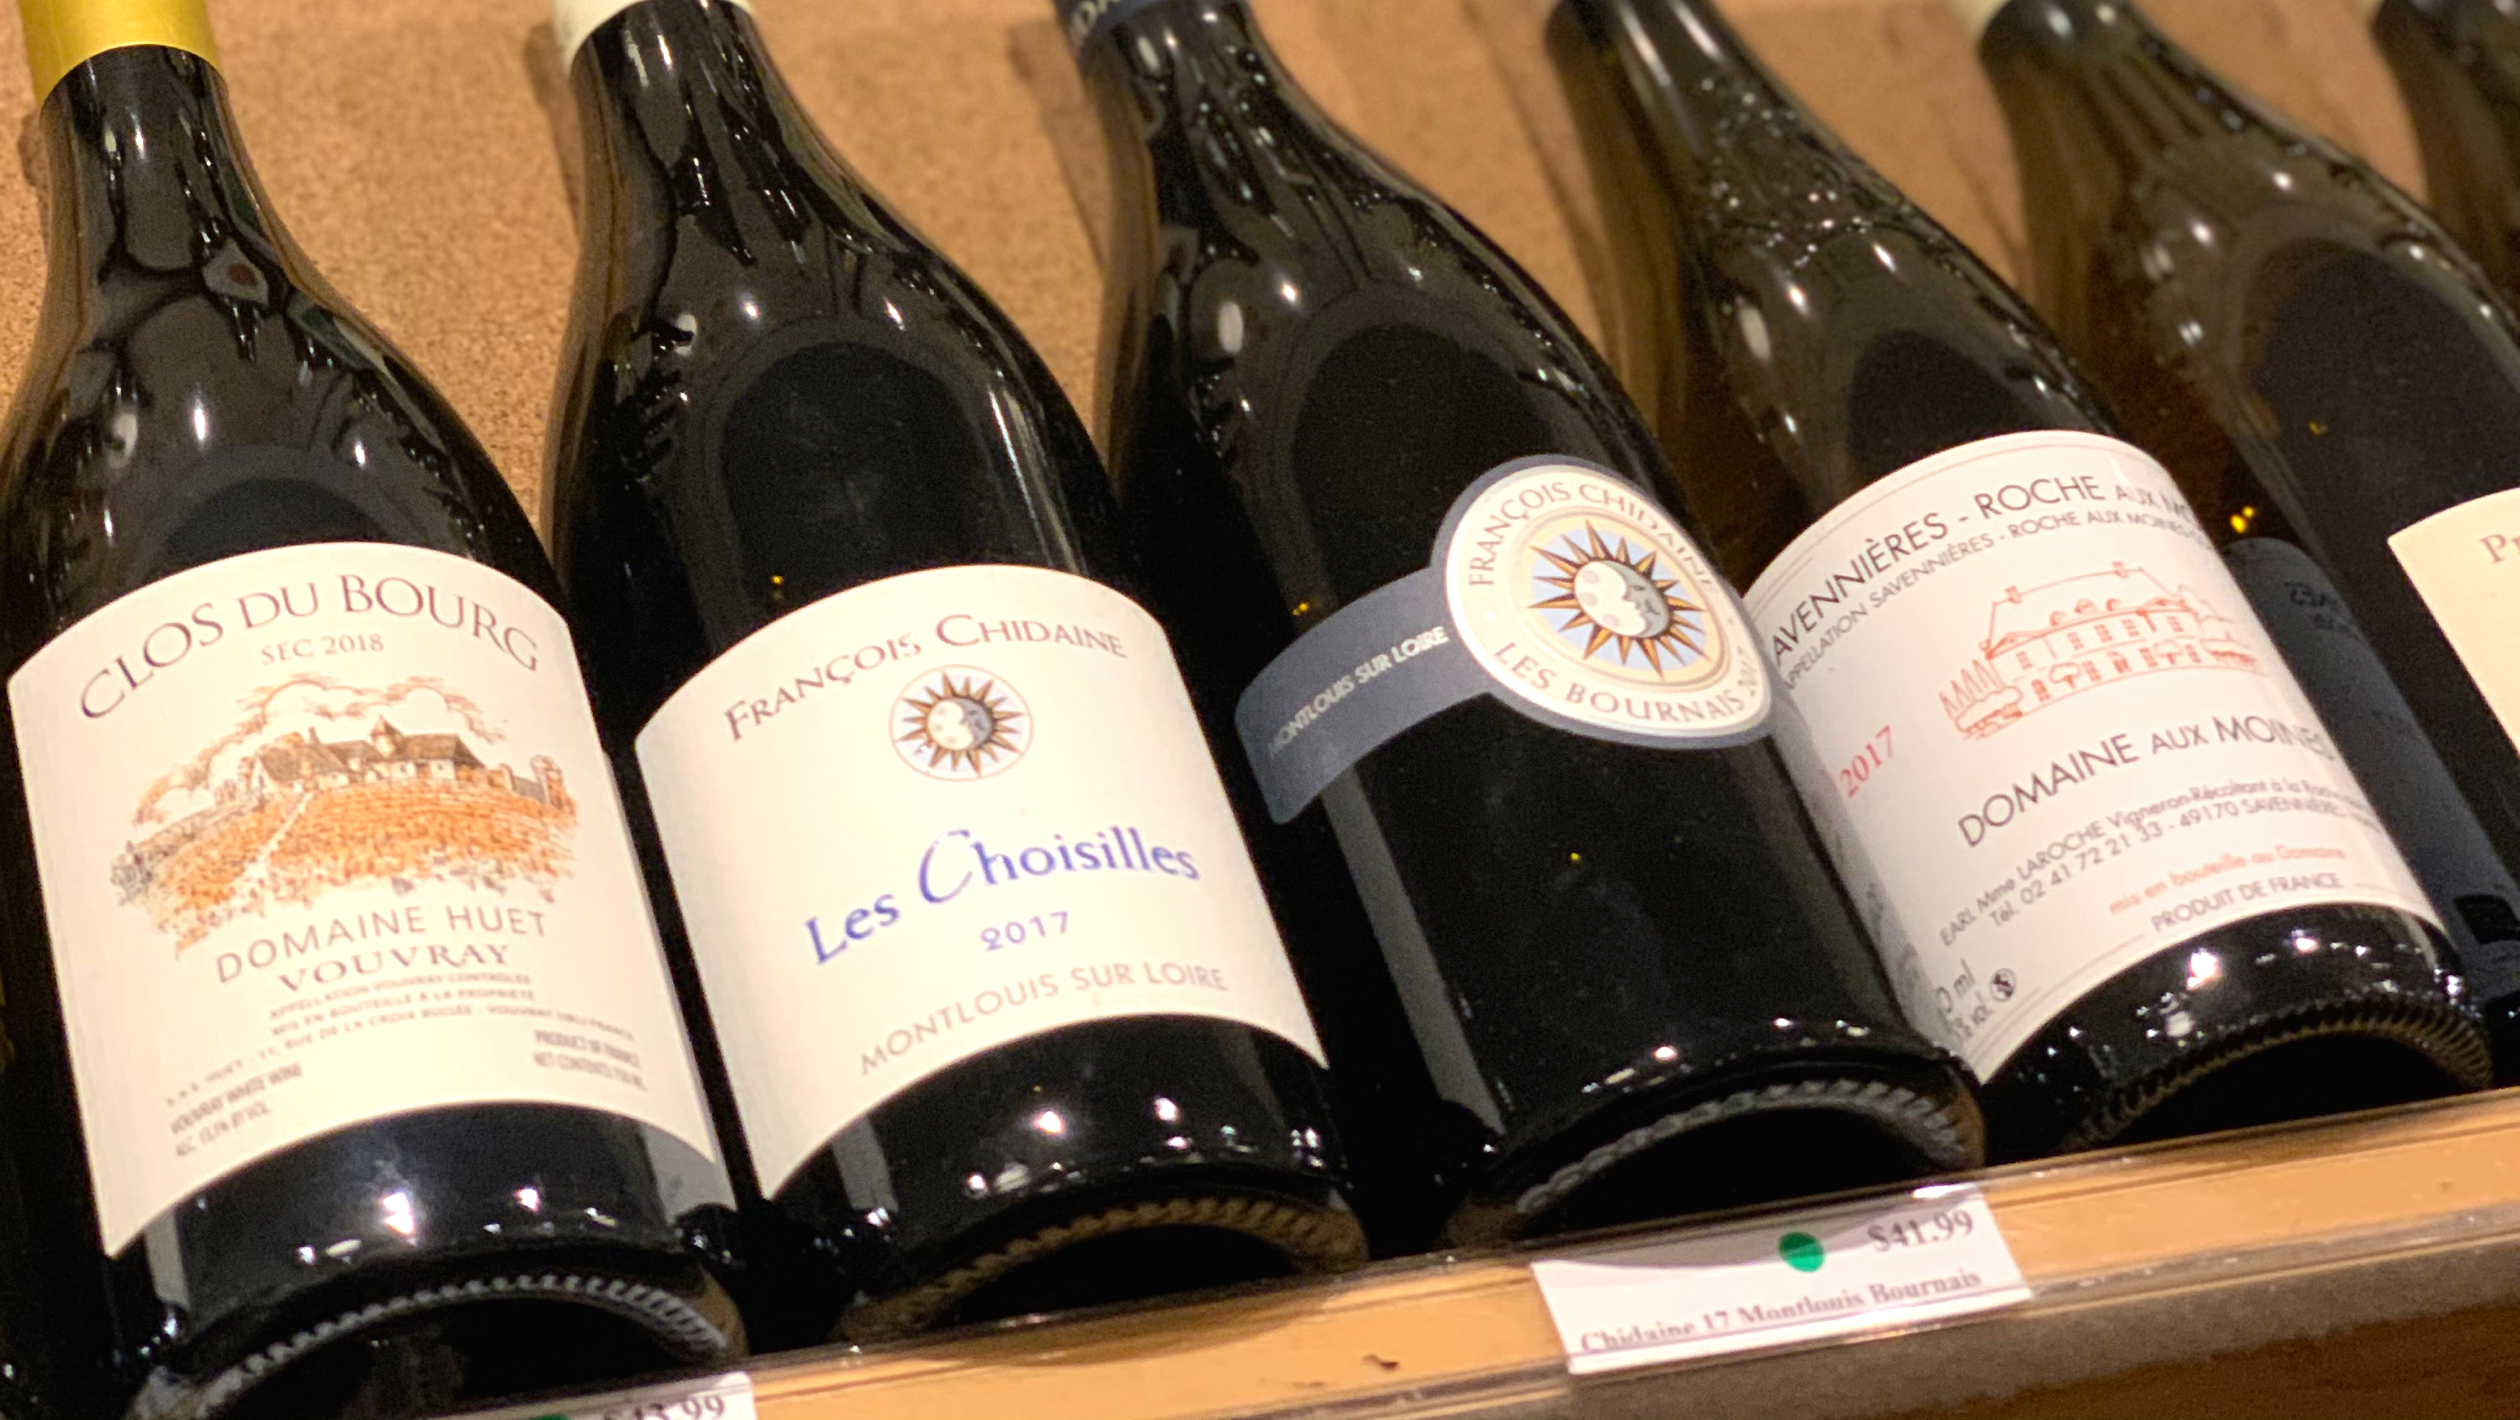 LVMH wine & spirits hit by supply issues - Drinks Trade